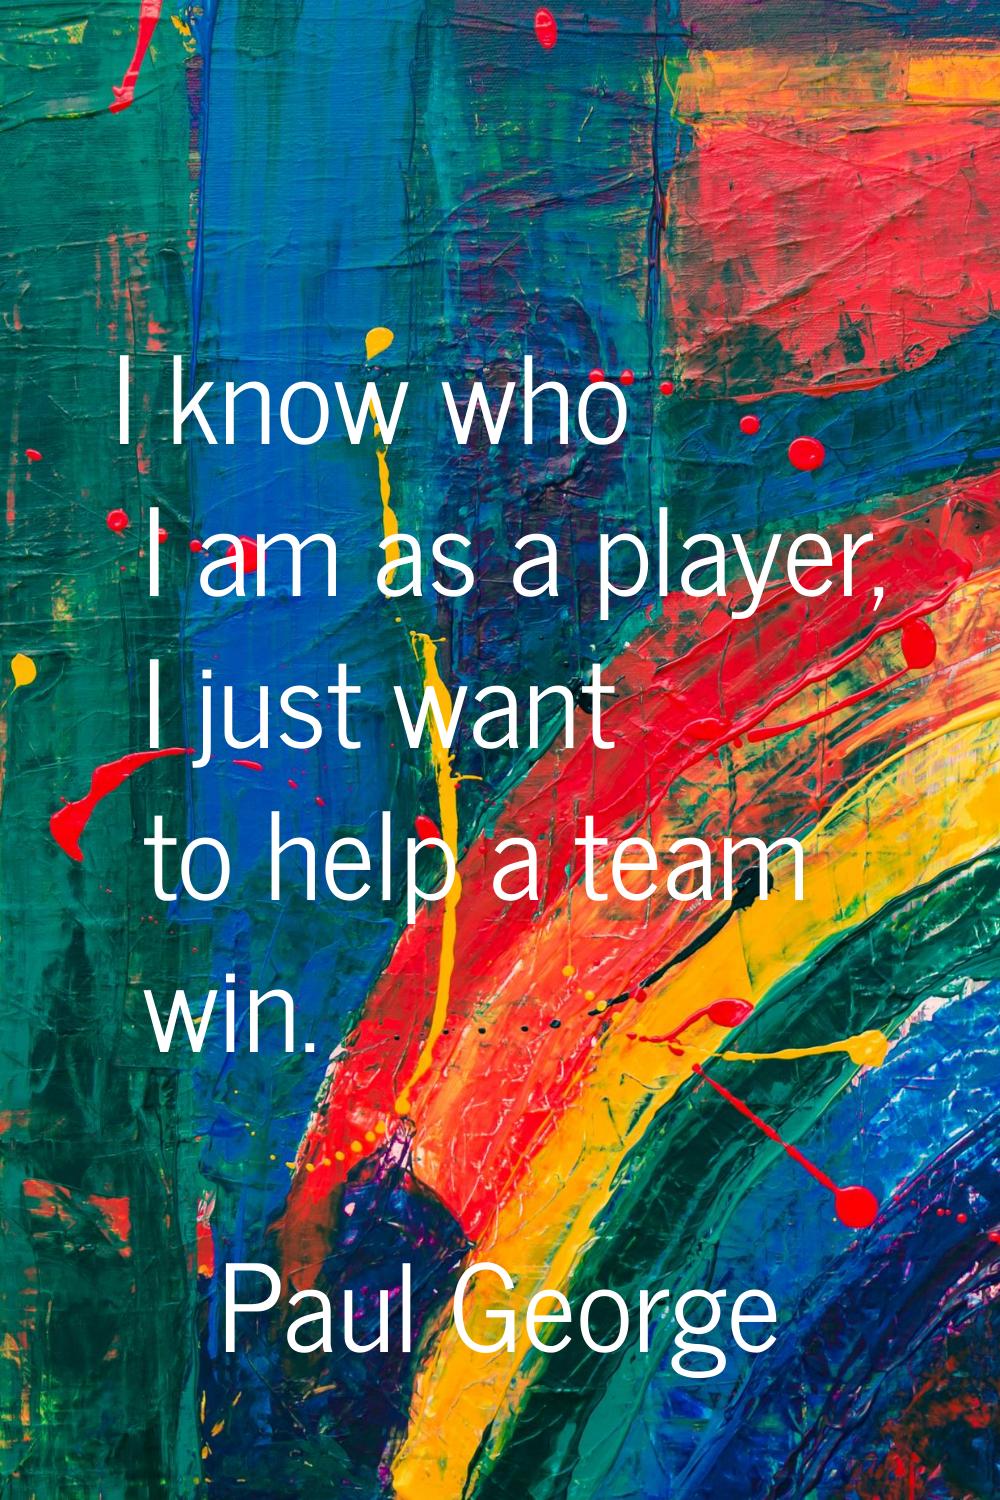 I know who I am as a player, I just want to help a team win.